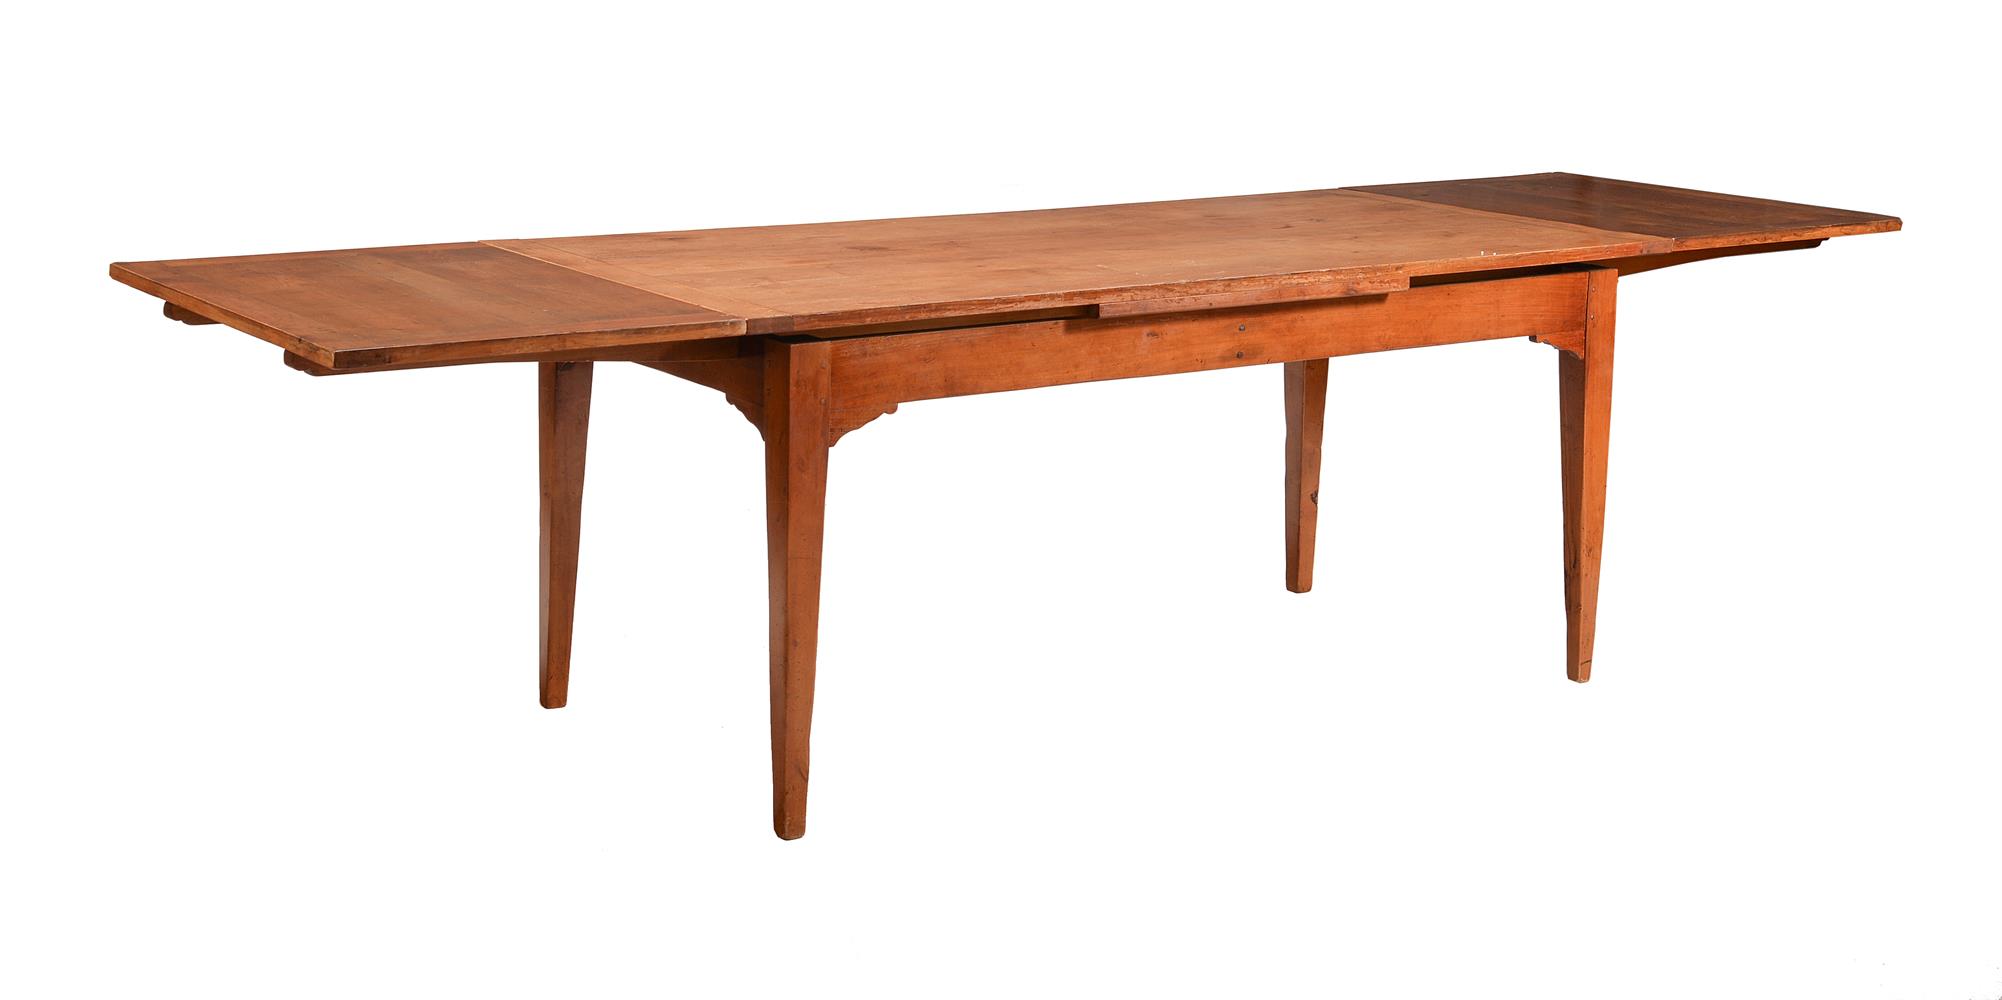 A FRENCH FRUITWOOD PROVINCIAL DRAW LEAF TABLE - Image 2 of 2